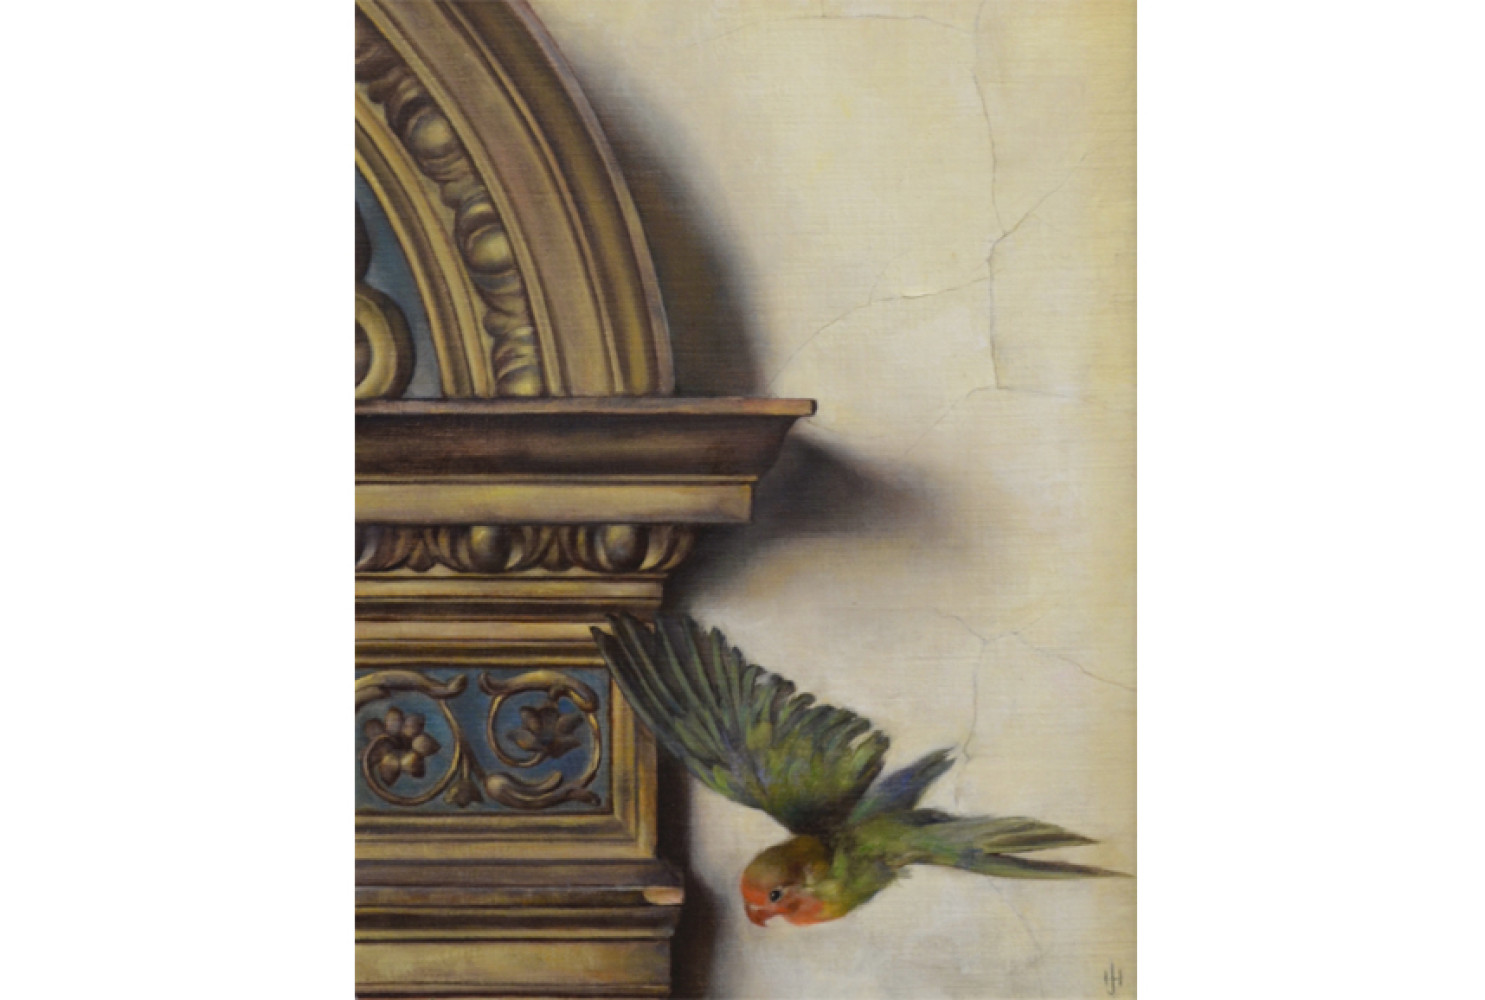 Flight, By Jill Hooper (American, b. 1970); Oil on linen on panel; 17 1/2 x 14 inches; Courtesy of a private collection